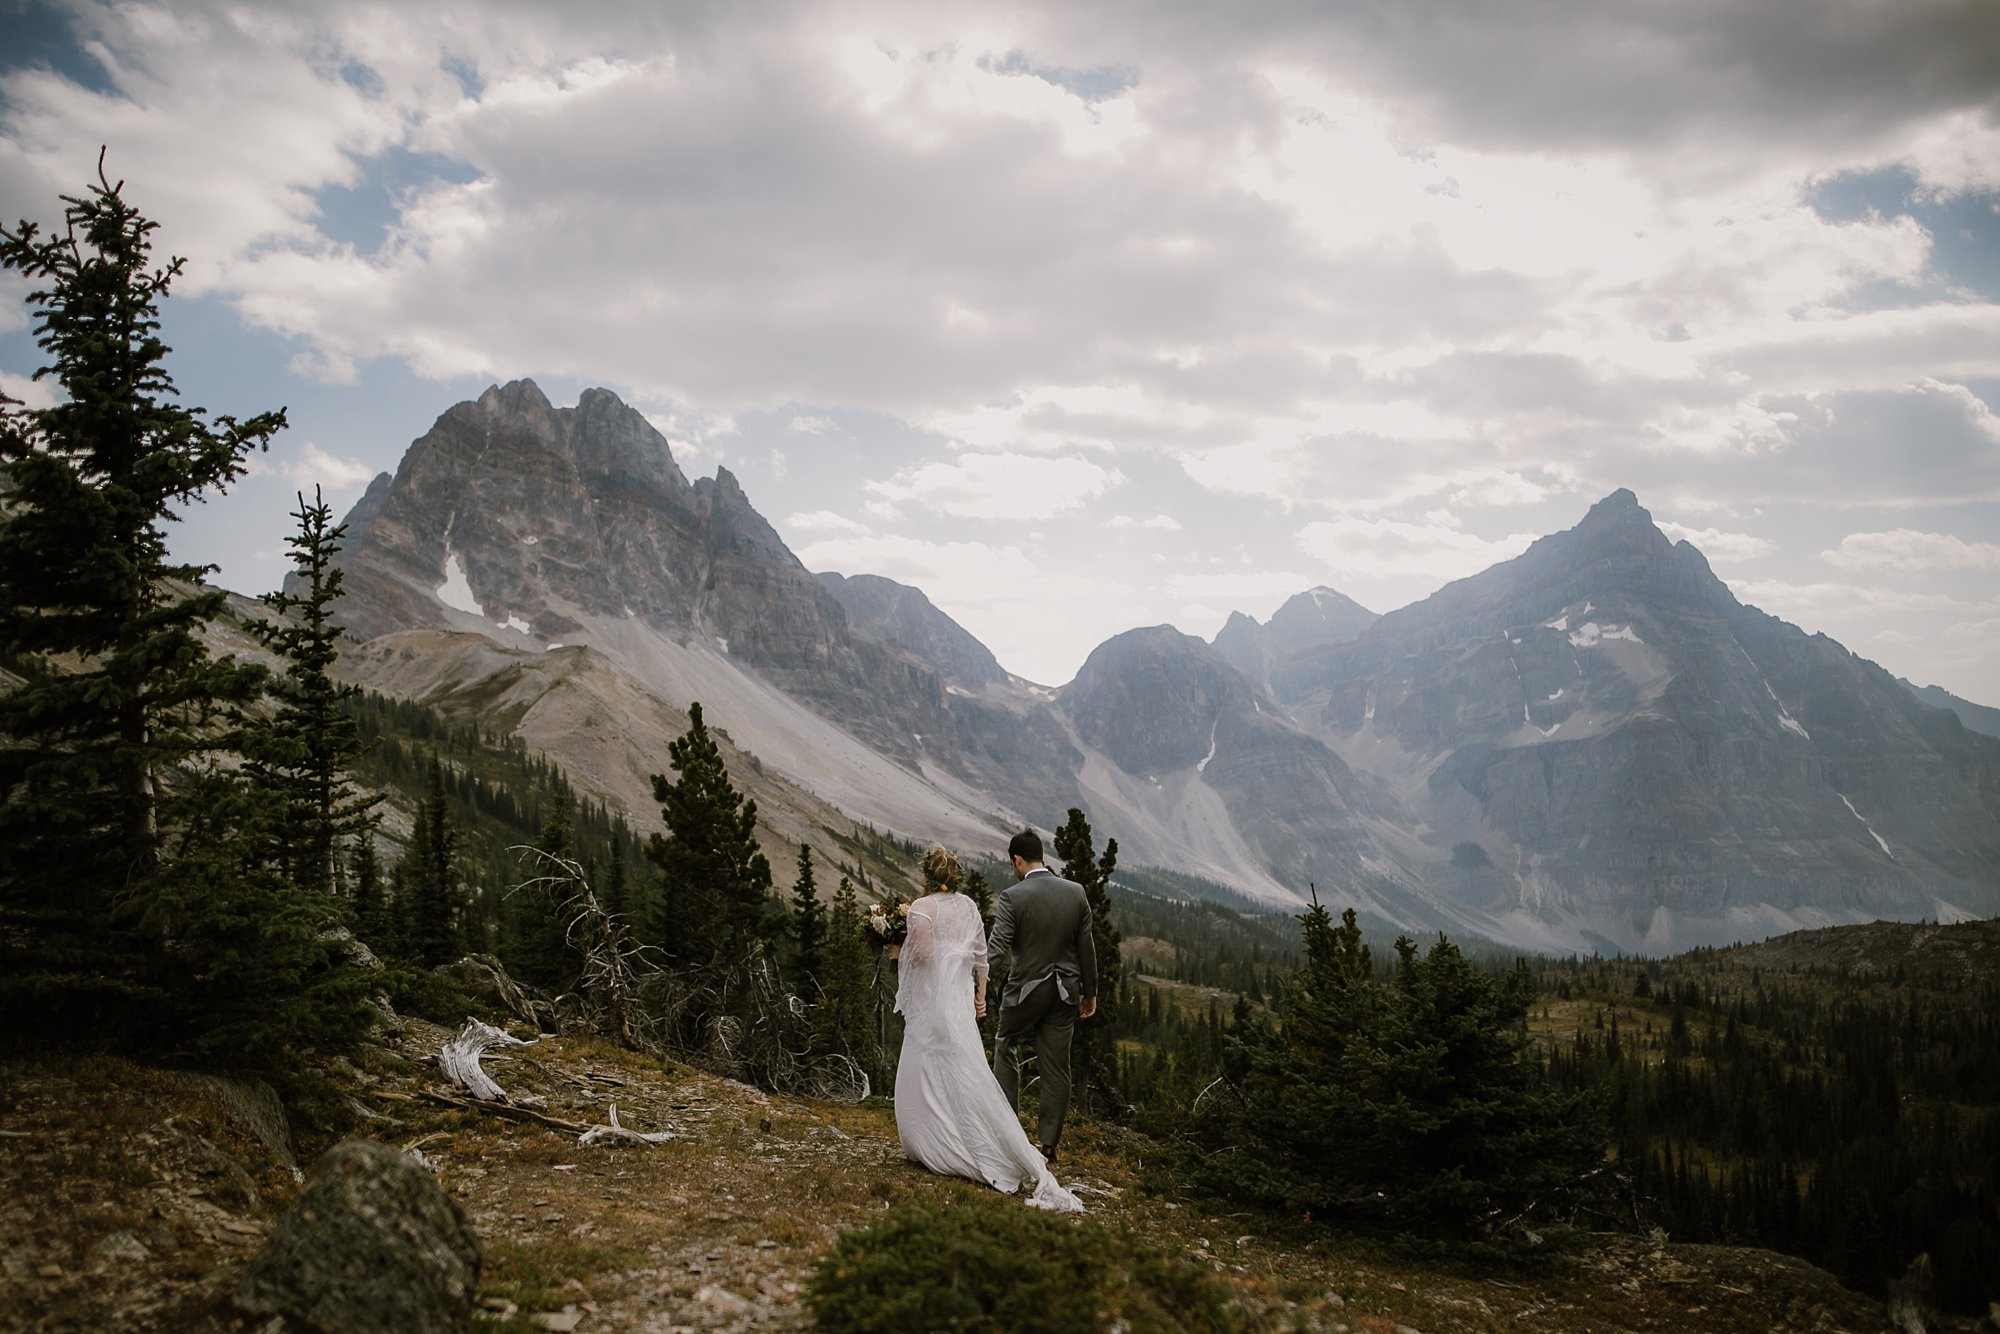 A bride and groom at their elopement in Banff, Canada